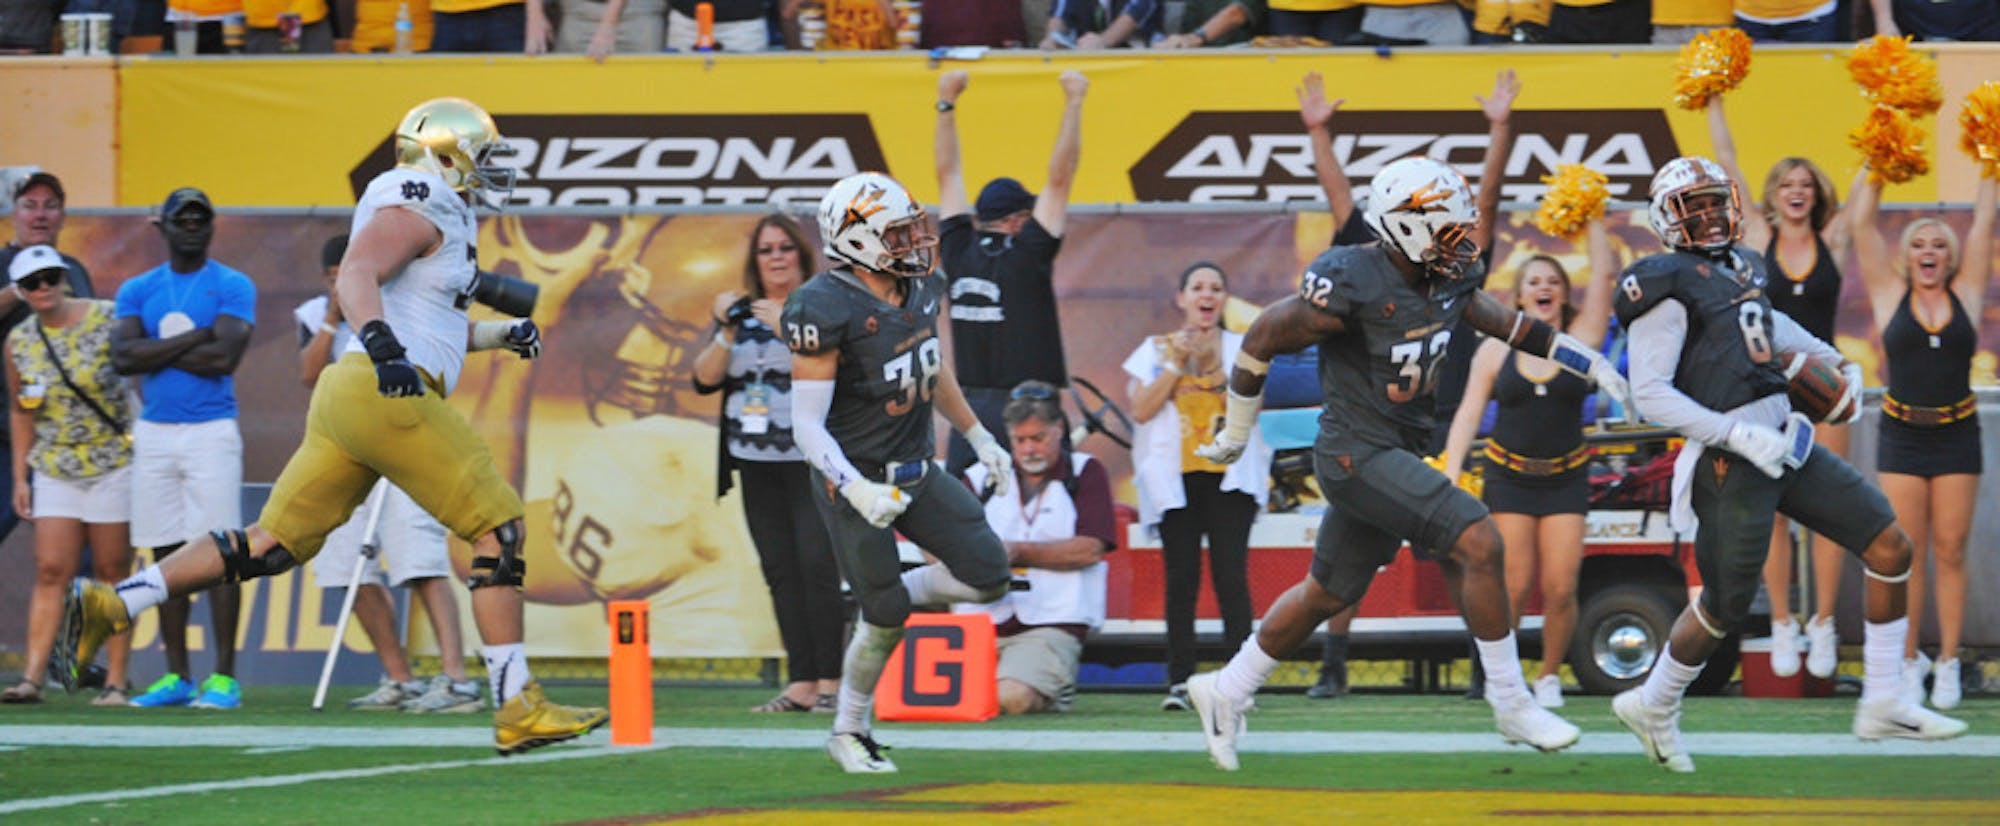 Arizona State redshirt junior defensive back Lloyd Carrington scampers into the end zone with a 58-yard interception return for a touchdown in the fourth quarter of the Sun Devils’ 55-31 win.